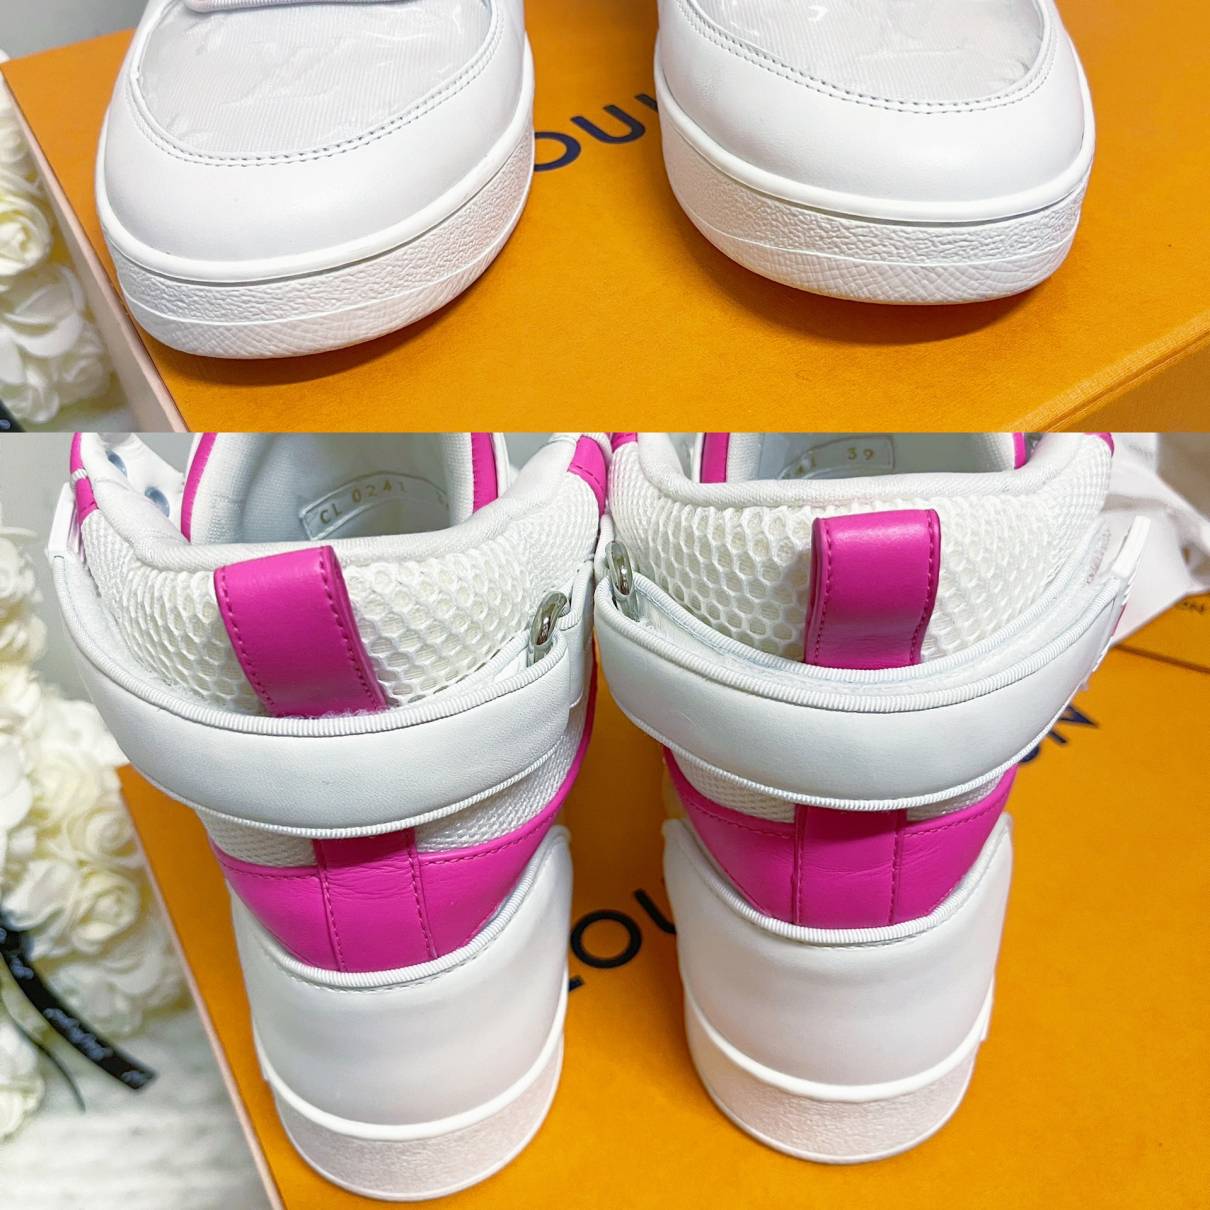 LOUIS VUITTON LV Boombox High-top Sport Shoes Pink/White #dmvshoes #sn